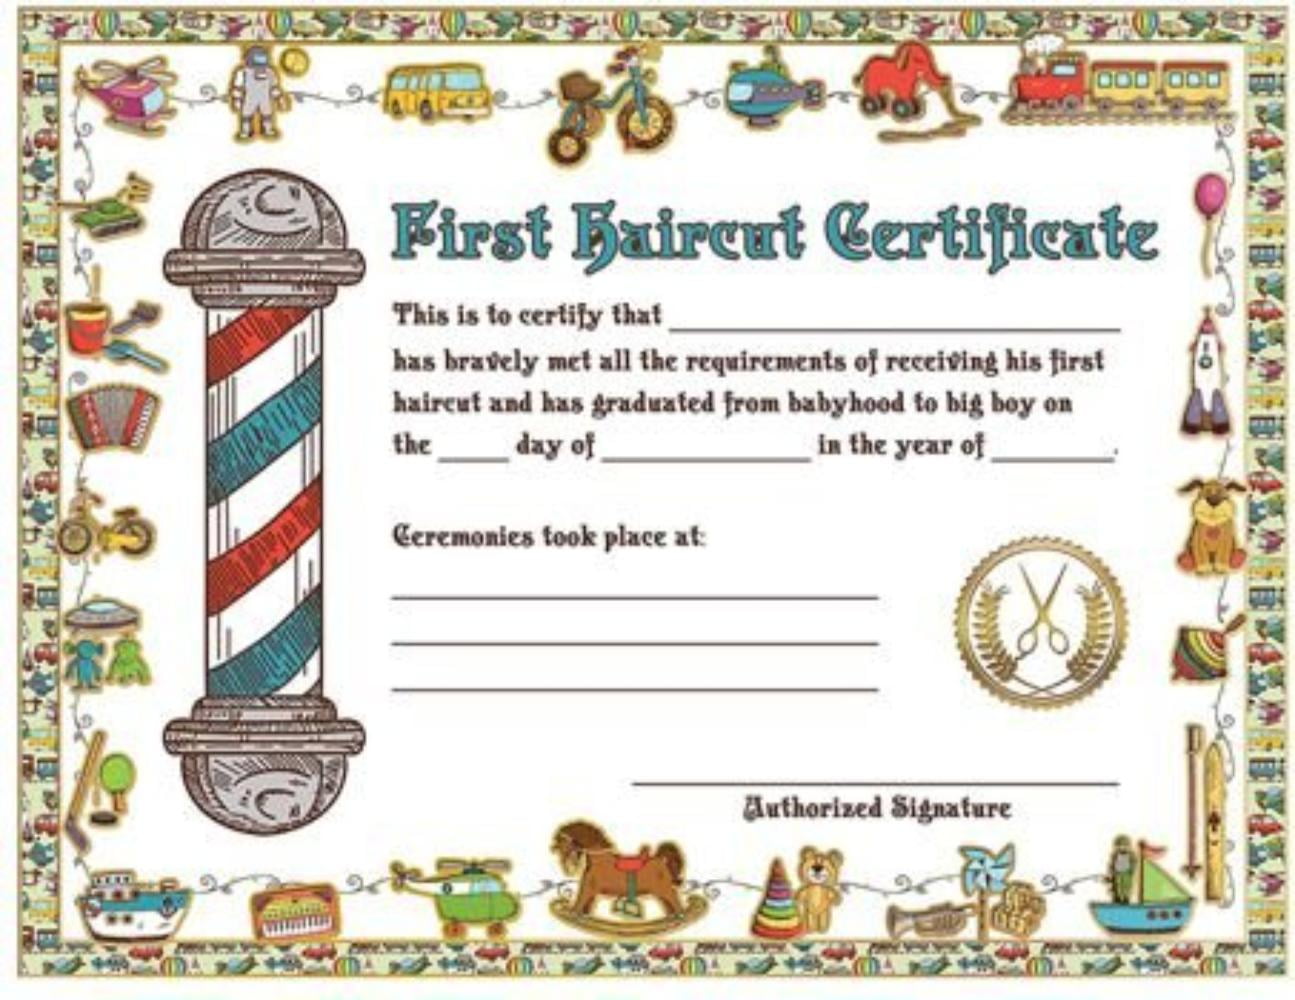 36 count new style Kids First Haircut Certificates 